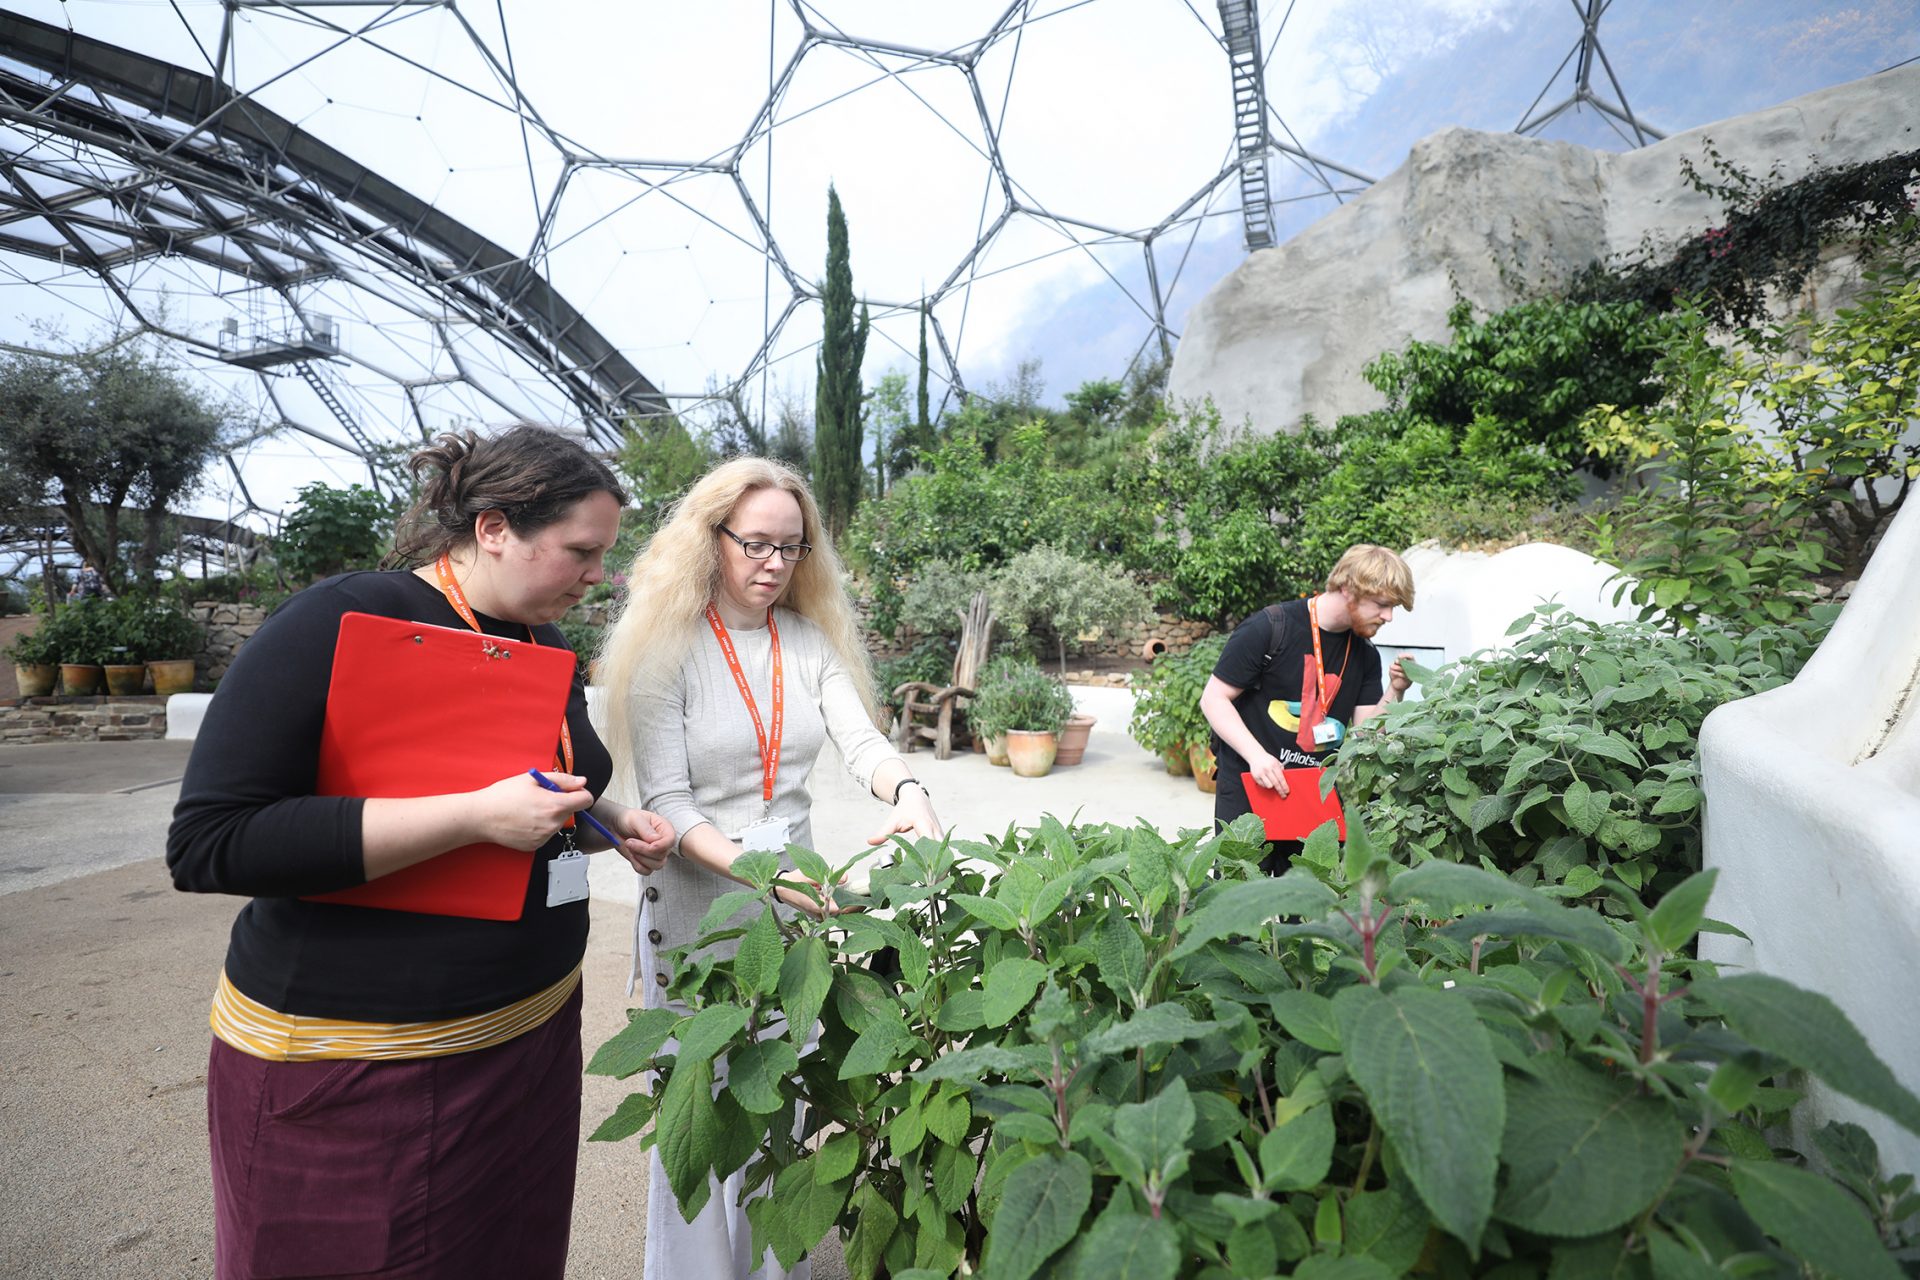 Students looking closely at plants in the biome at The Eden Project